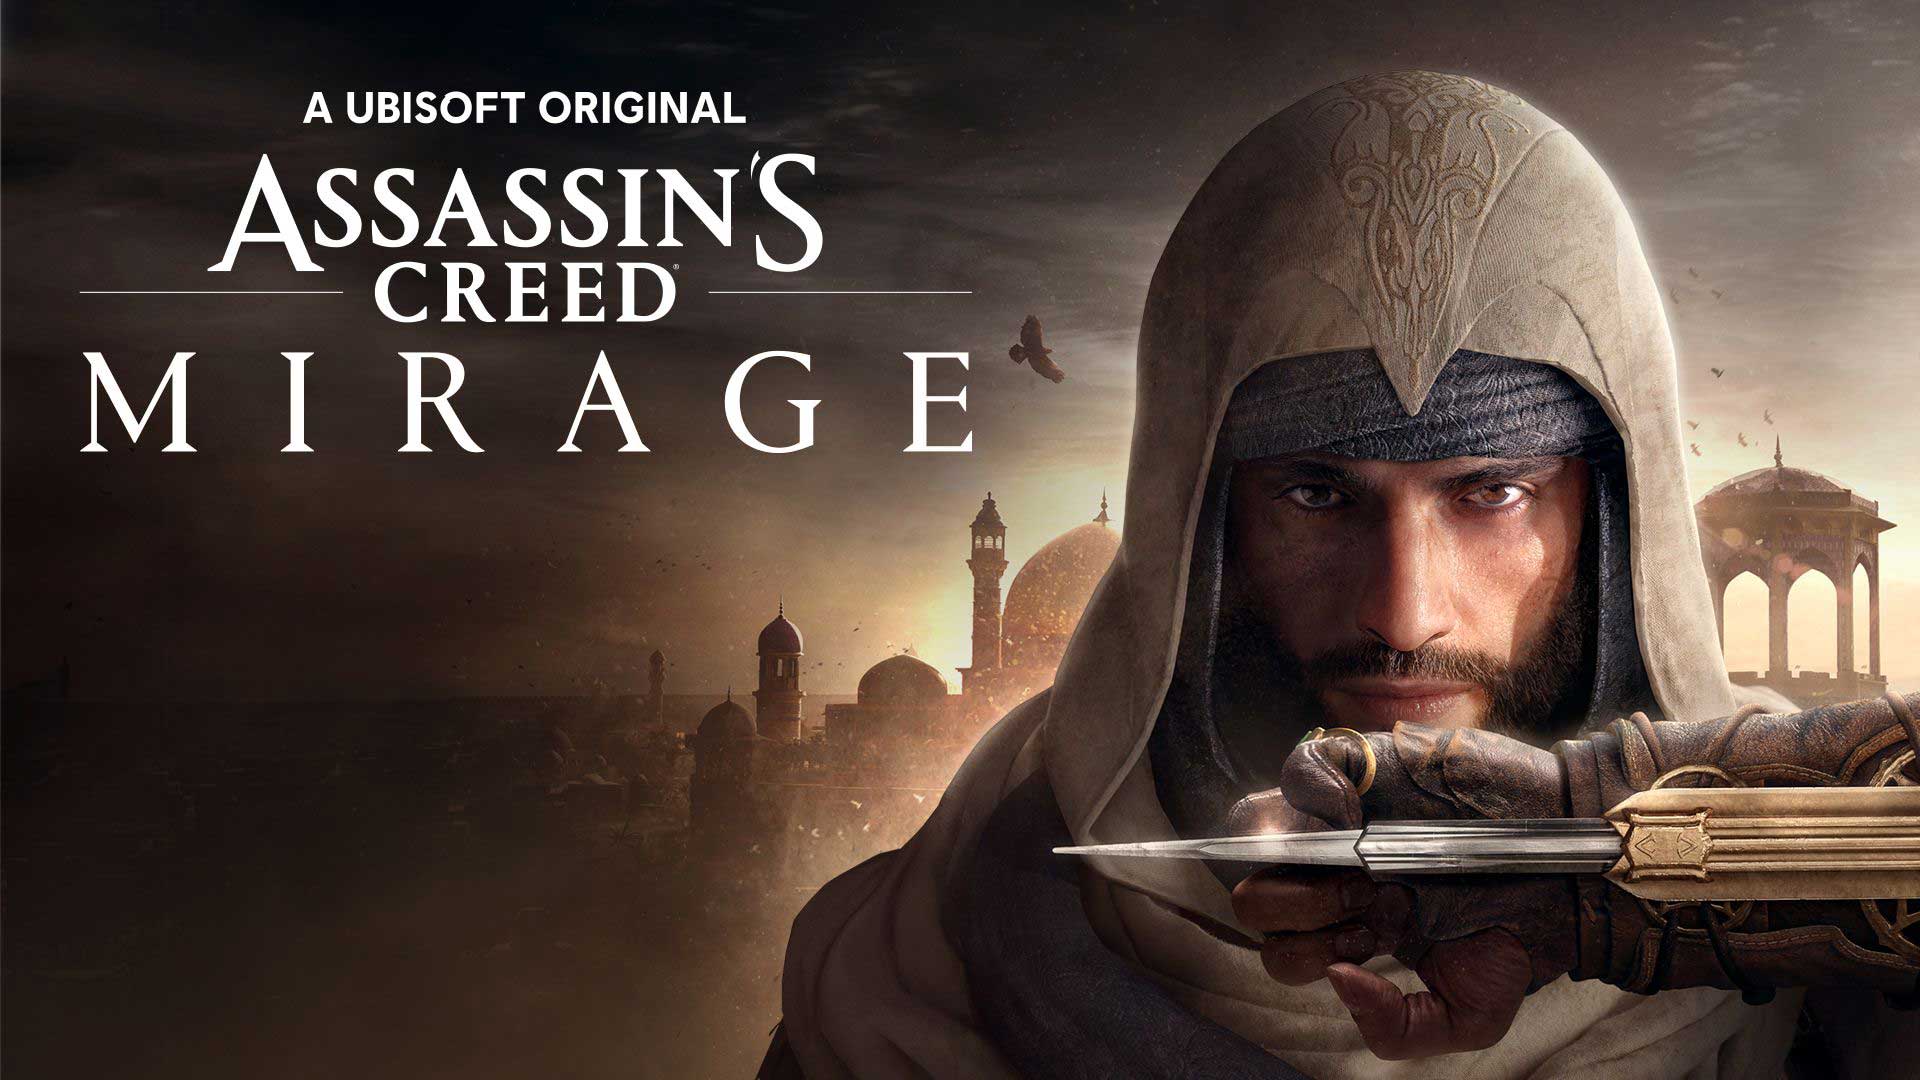 Assassin’s Creed Mirage, Games Boss Fights, gamesbossfights.com